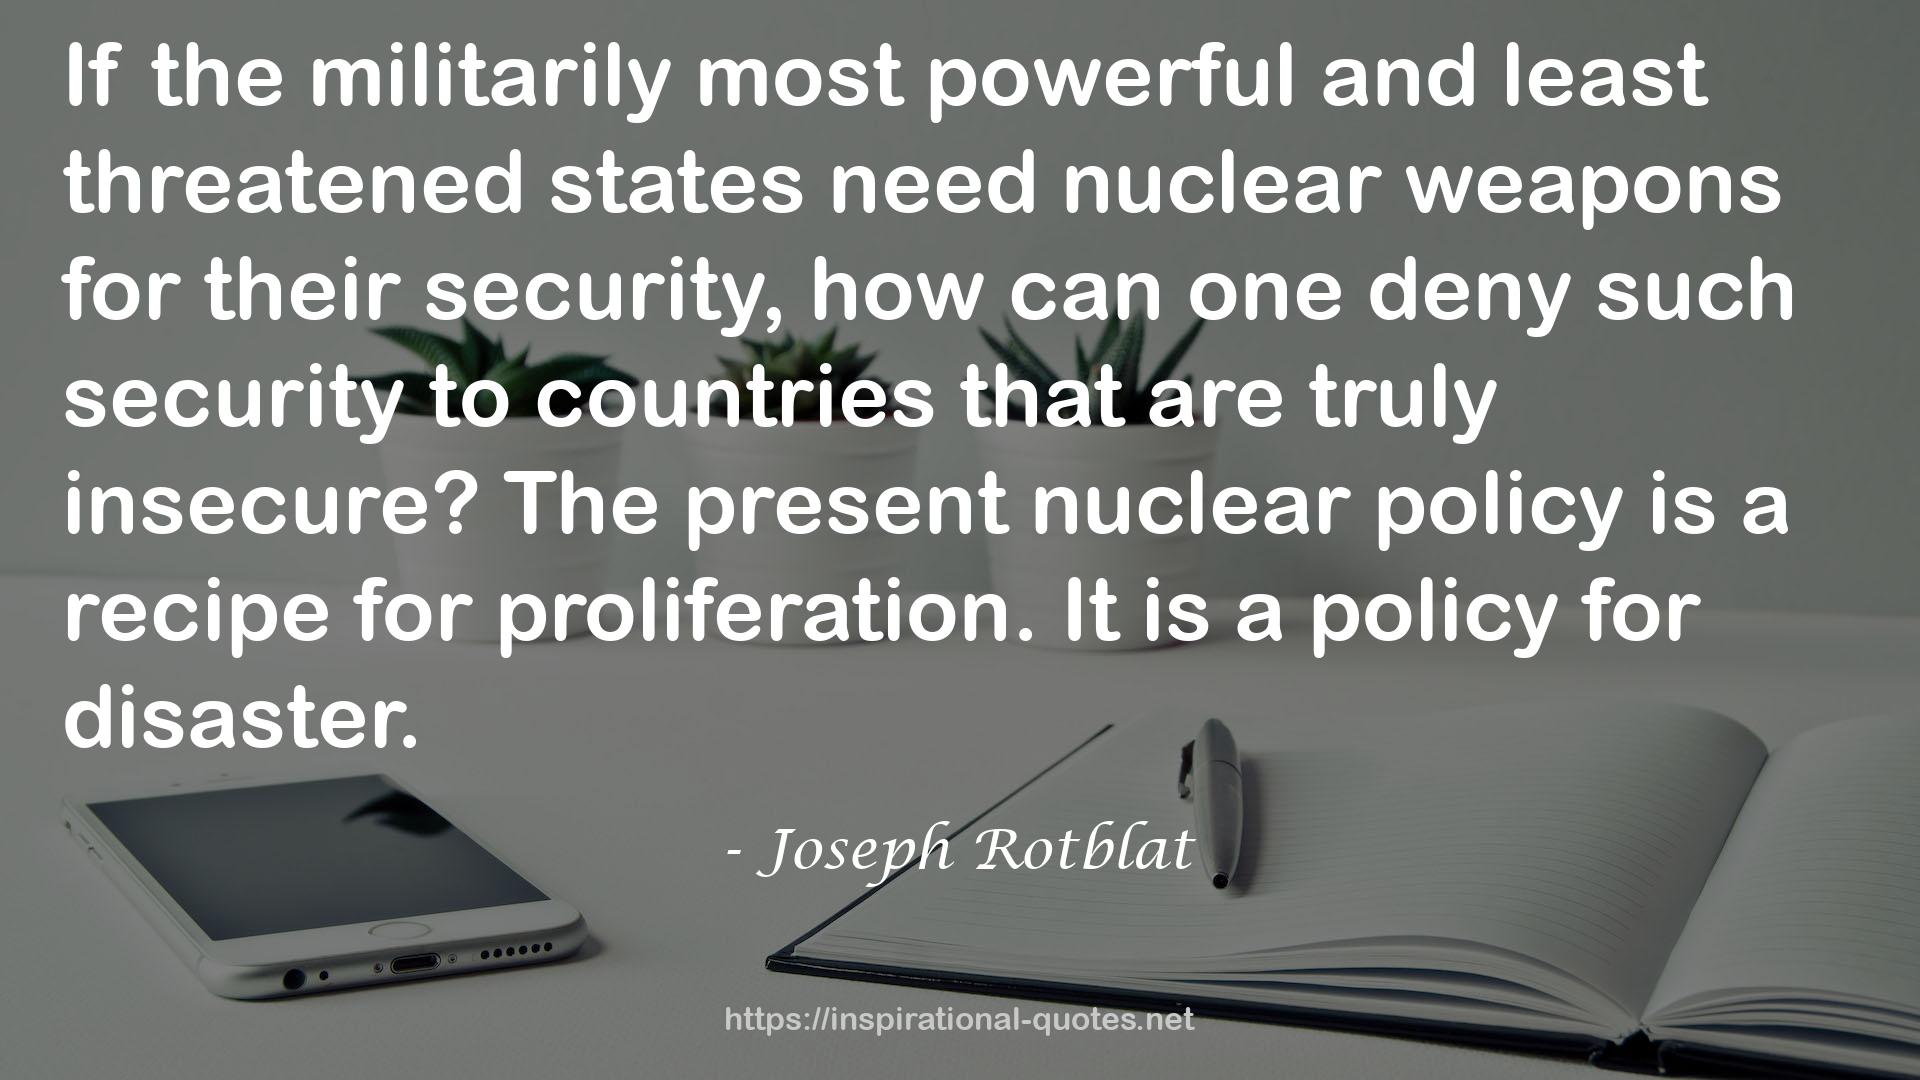 The present nuclear policy  QUOTES